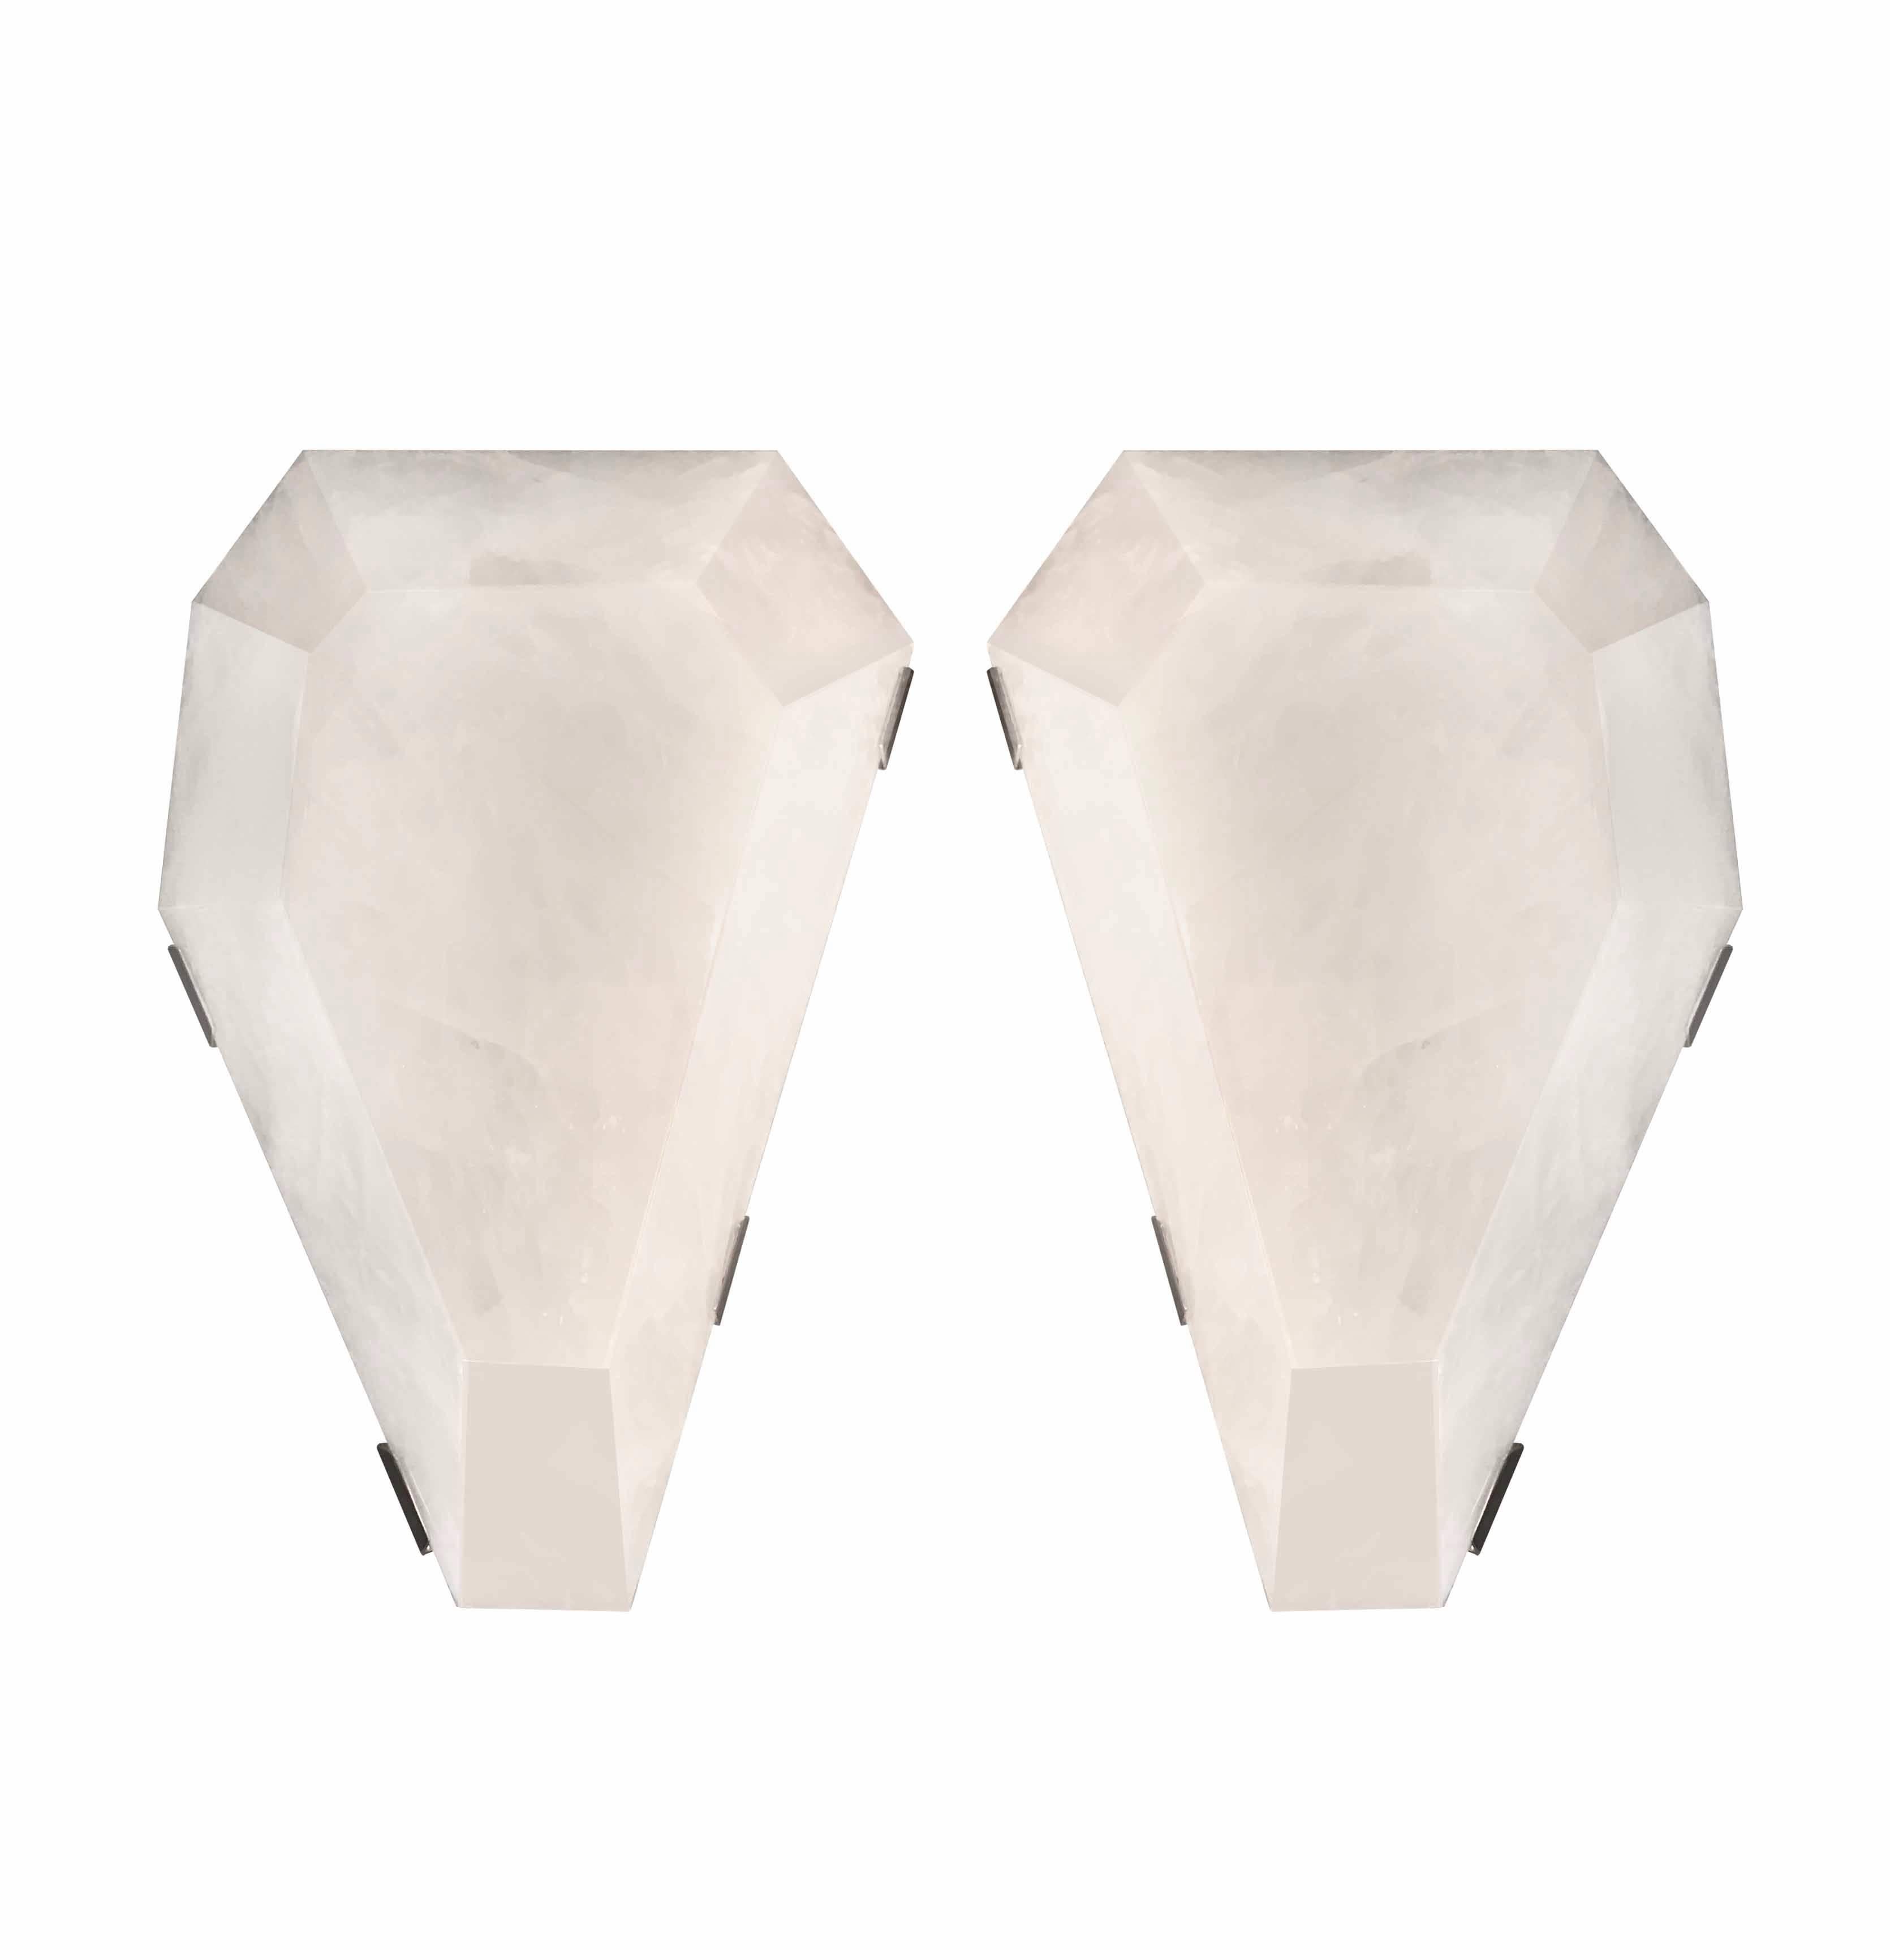 Two Pair of Diamond Form Rock Crystal Wall Sconces